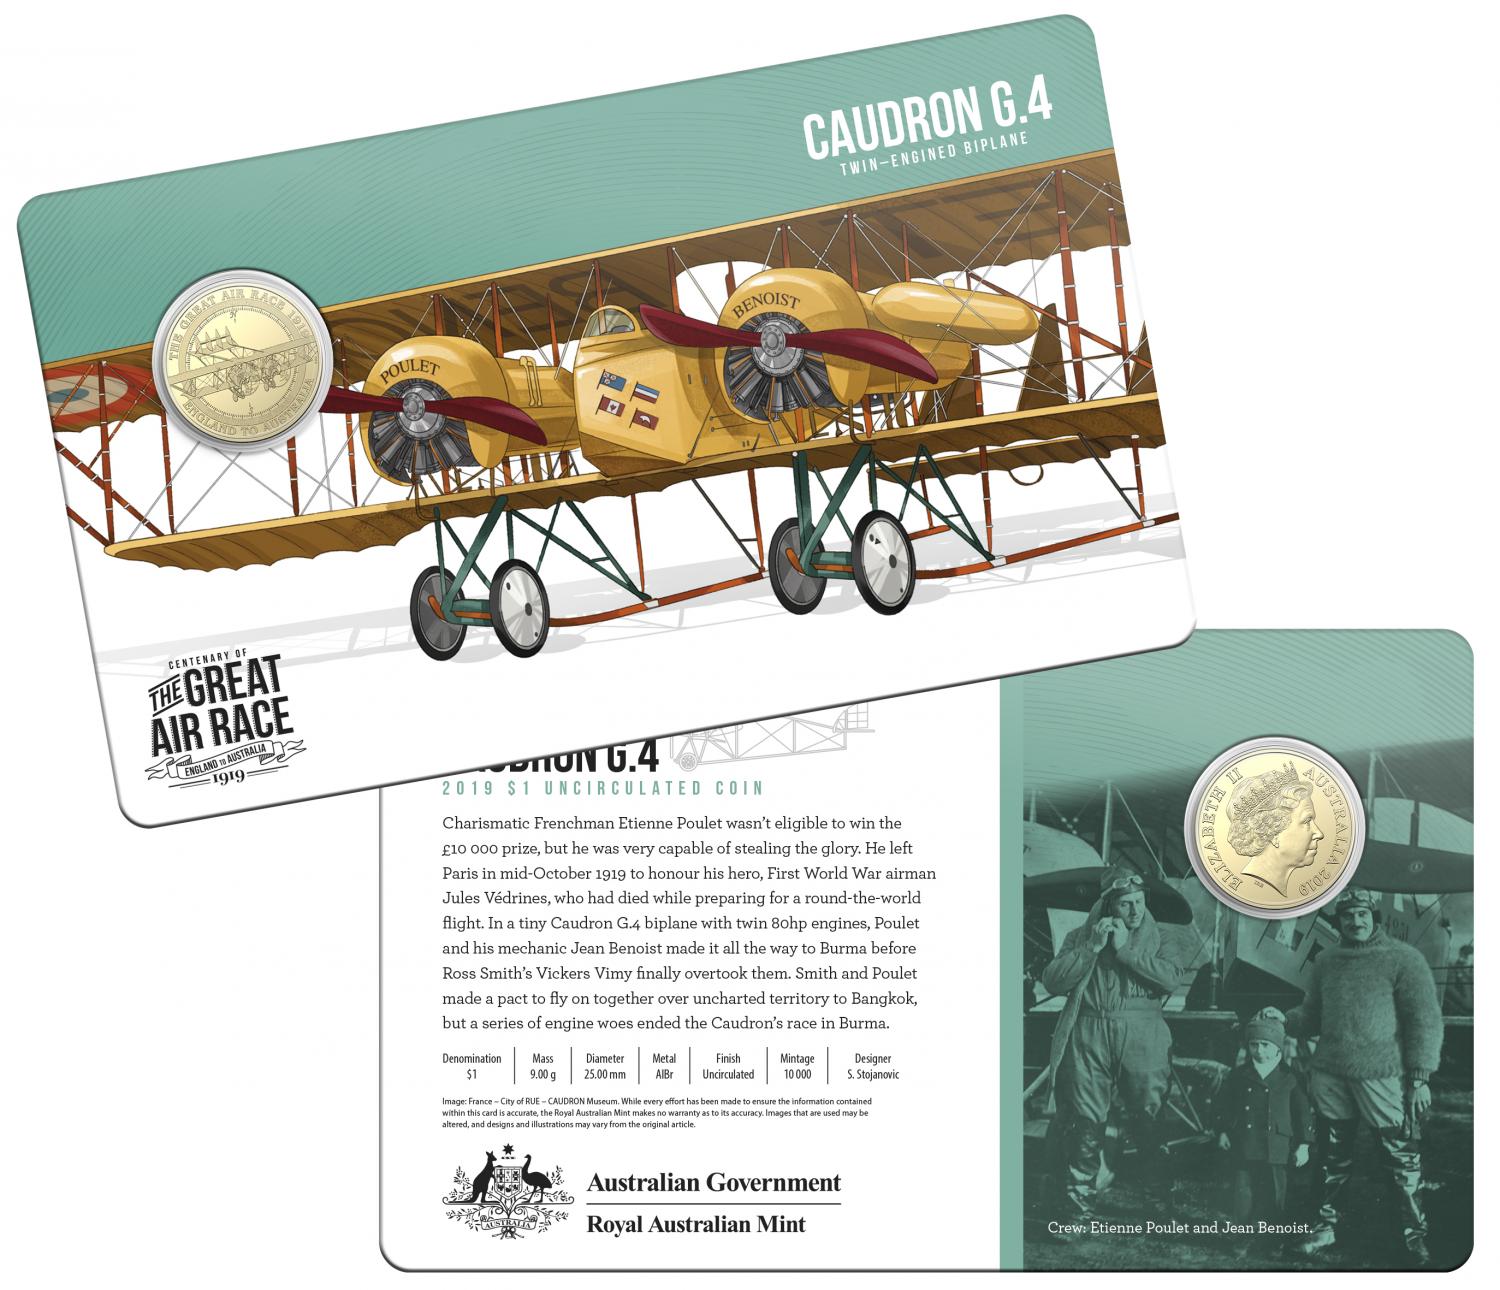 Thumbnail for 2019 Centenary off the Great Air Race Uncirculated $1.00 - Caudron G.4